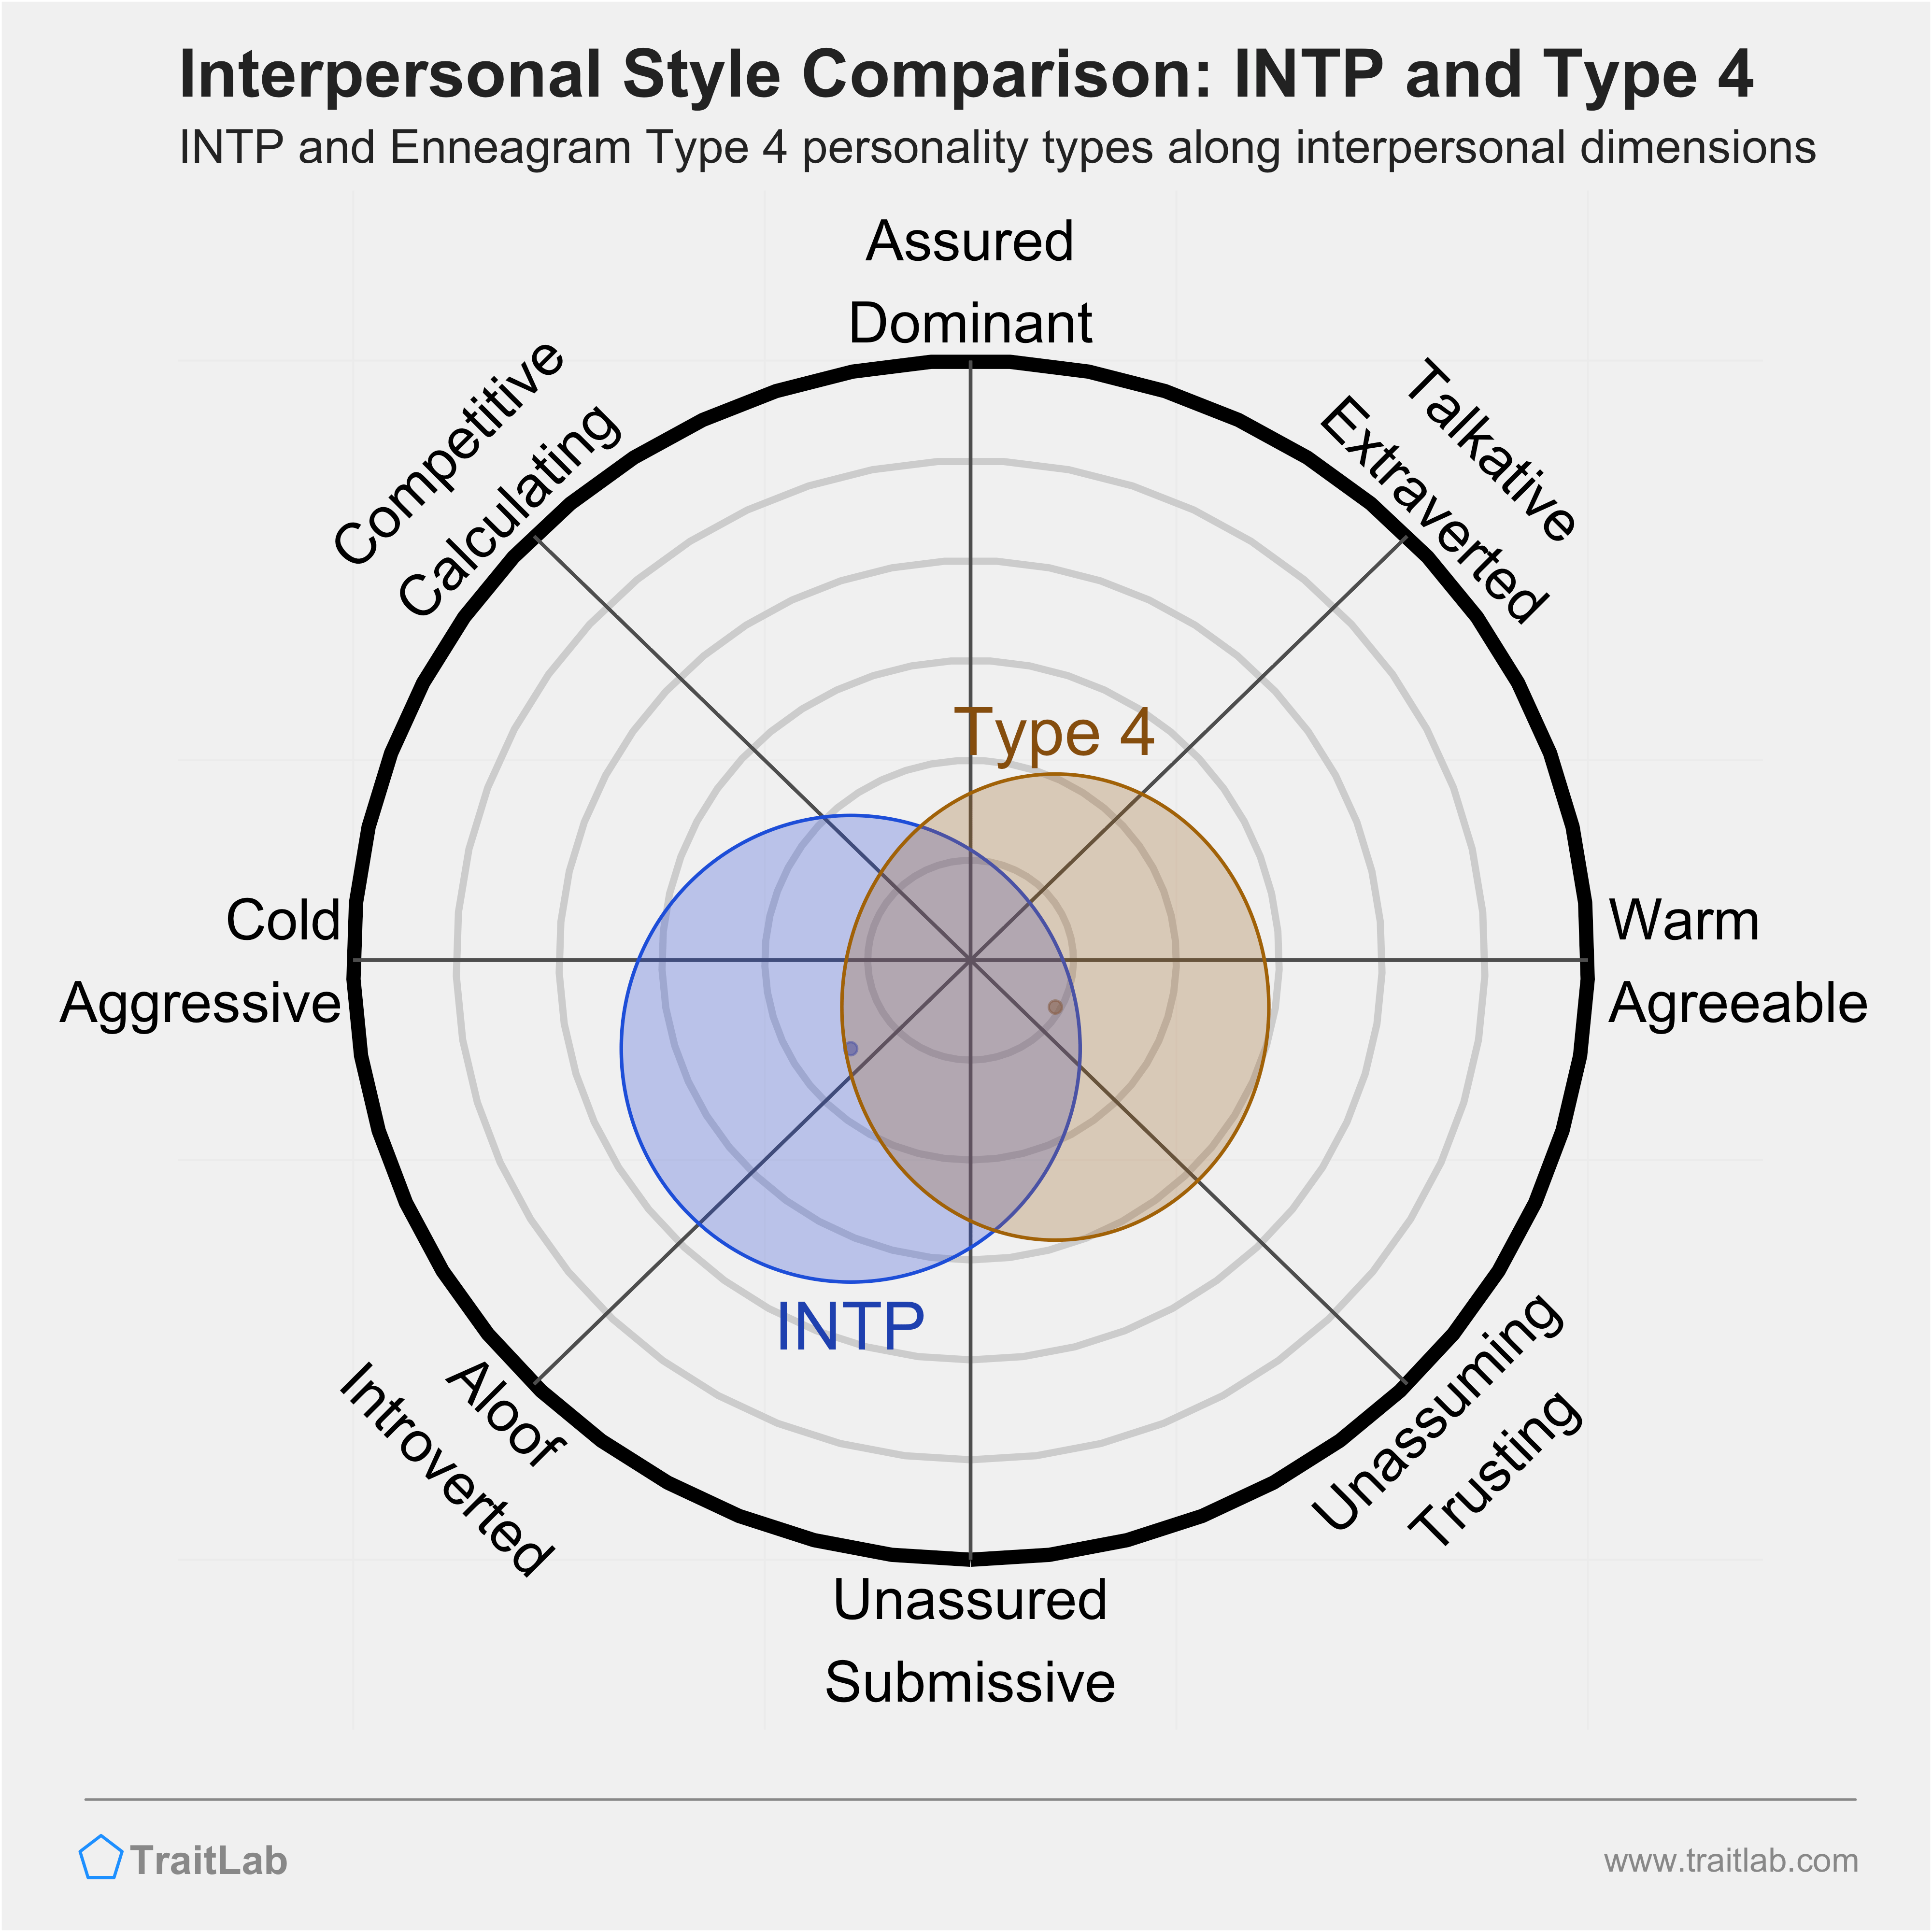 Enneagram INTP and Type 4 comparison across interpersonal dimensions